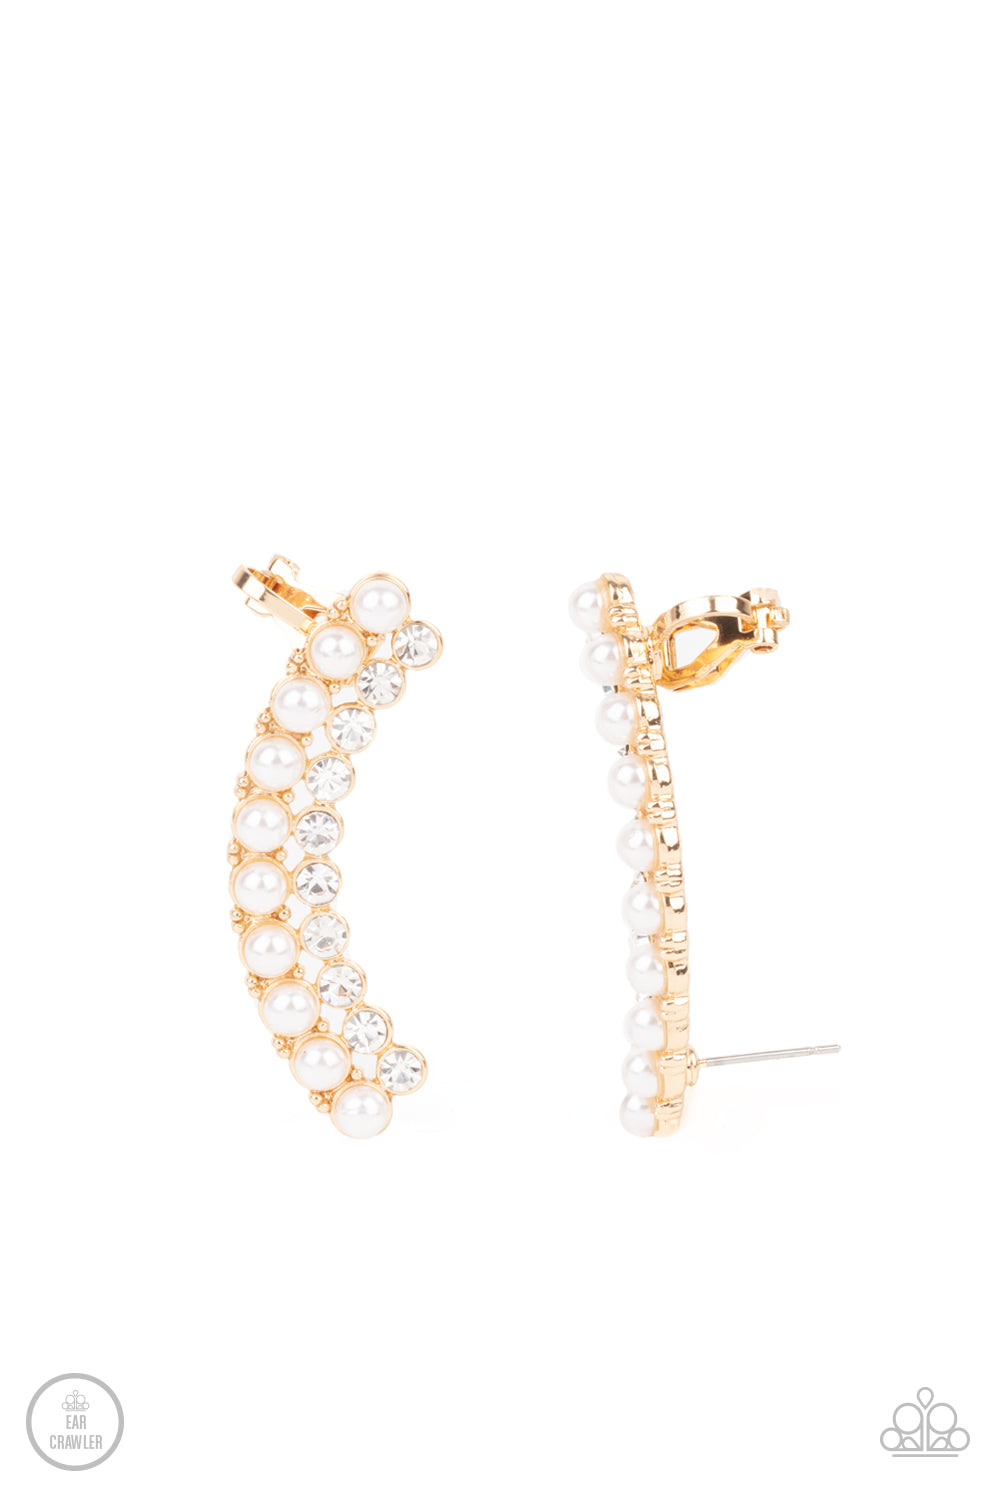 Paparazzi Accessories - Doubled Down On Dazzle #E599 - Gold Earrings